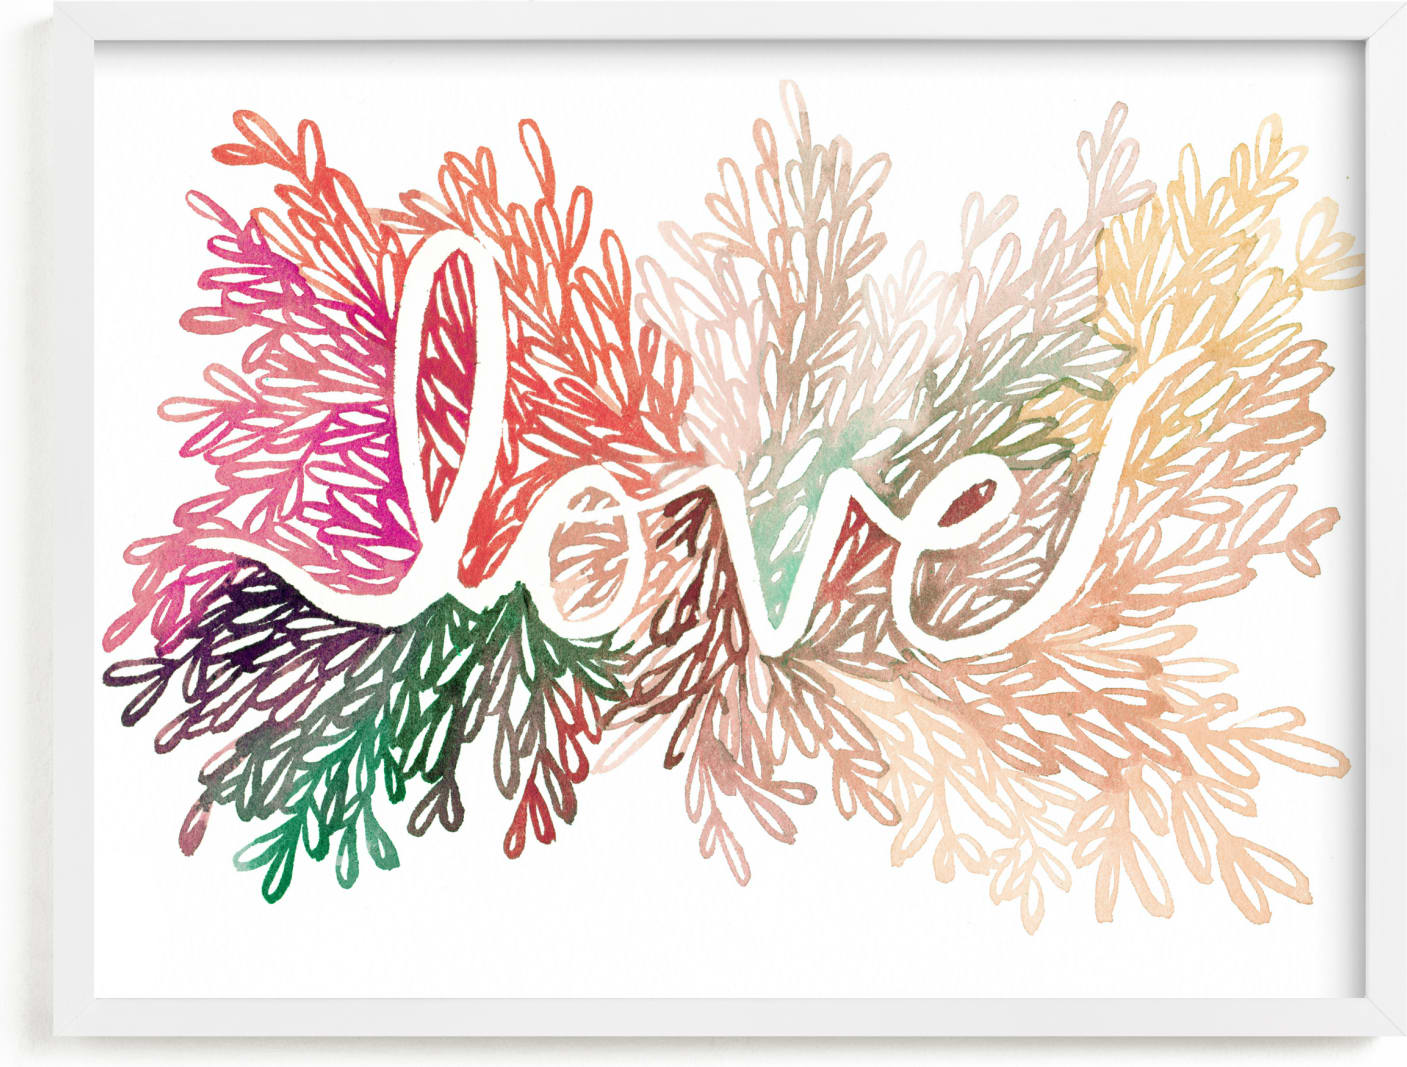 This is a colorful, pink art by Kelly Ventura called Love.